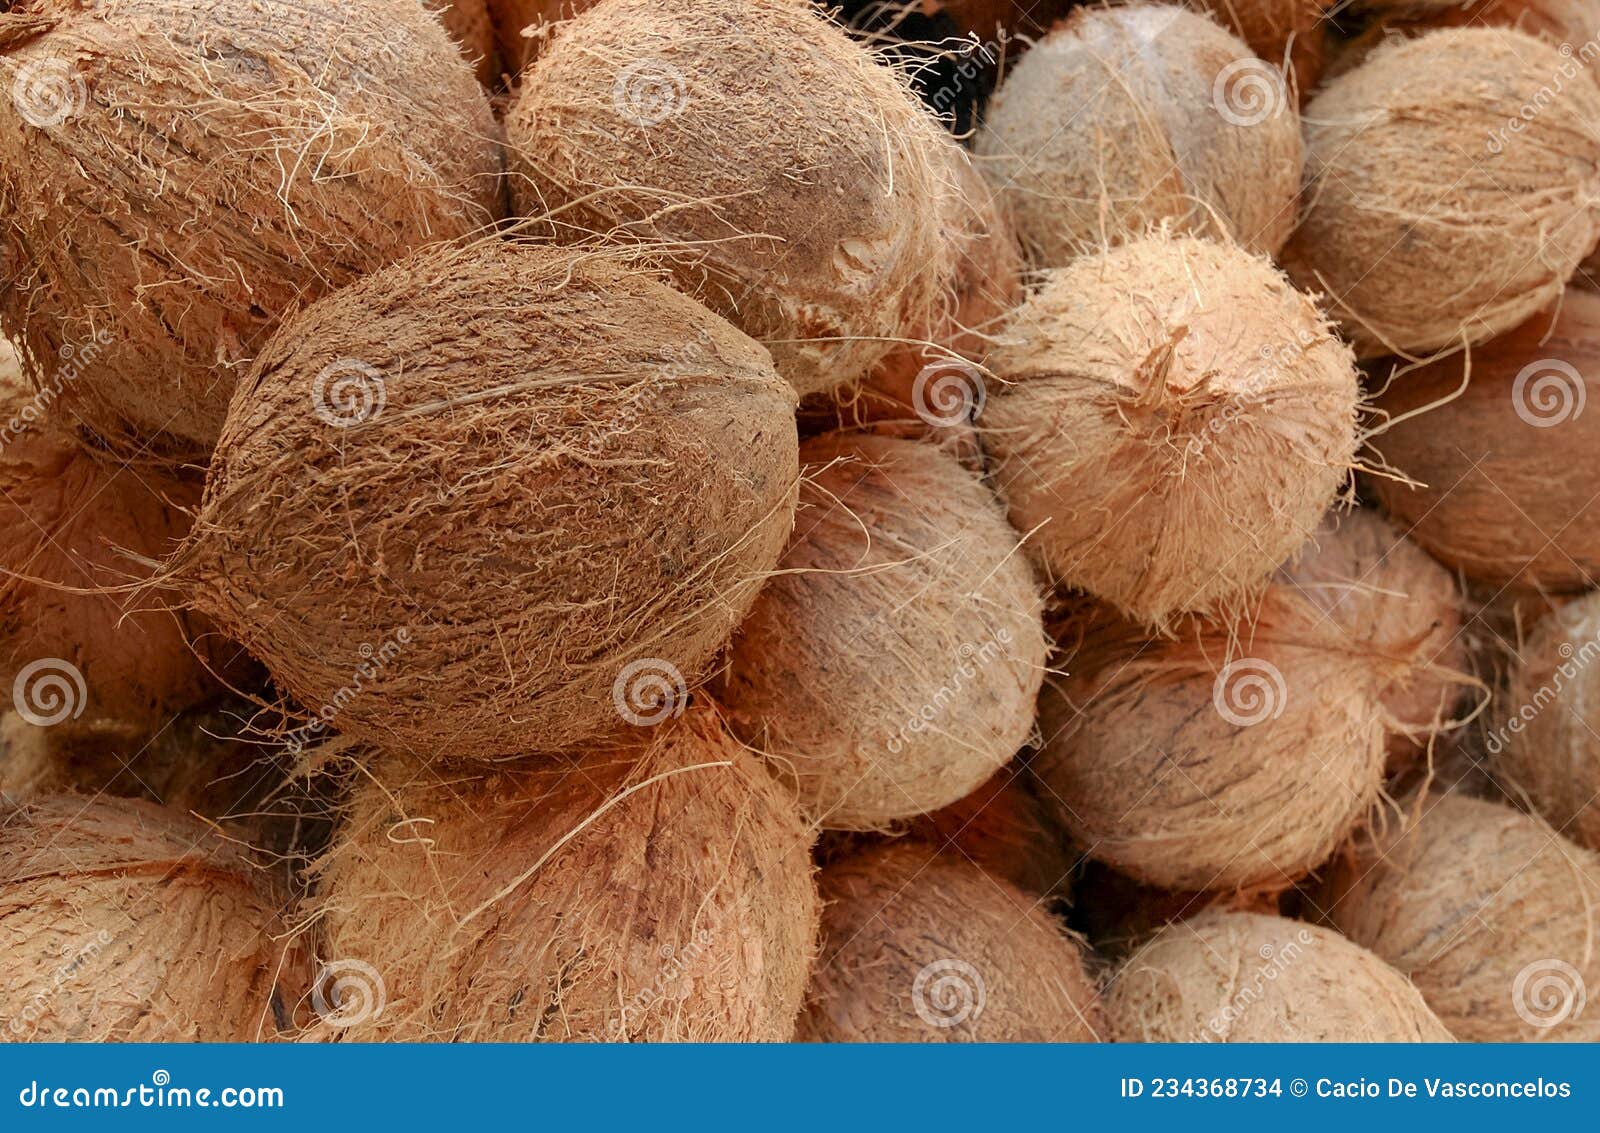 dry coconuts for industrial processing